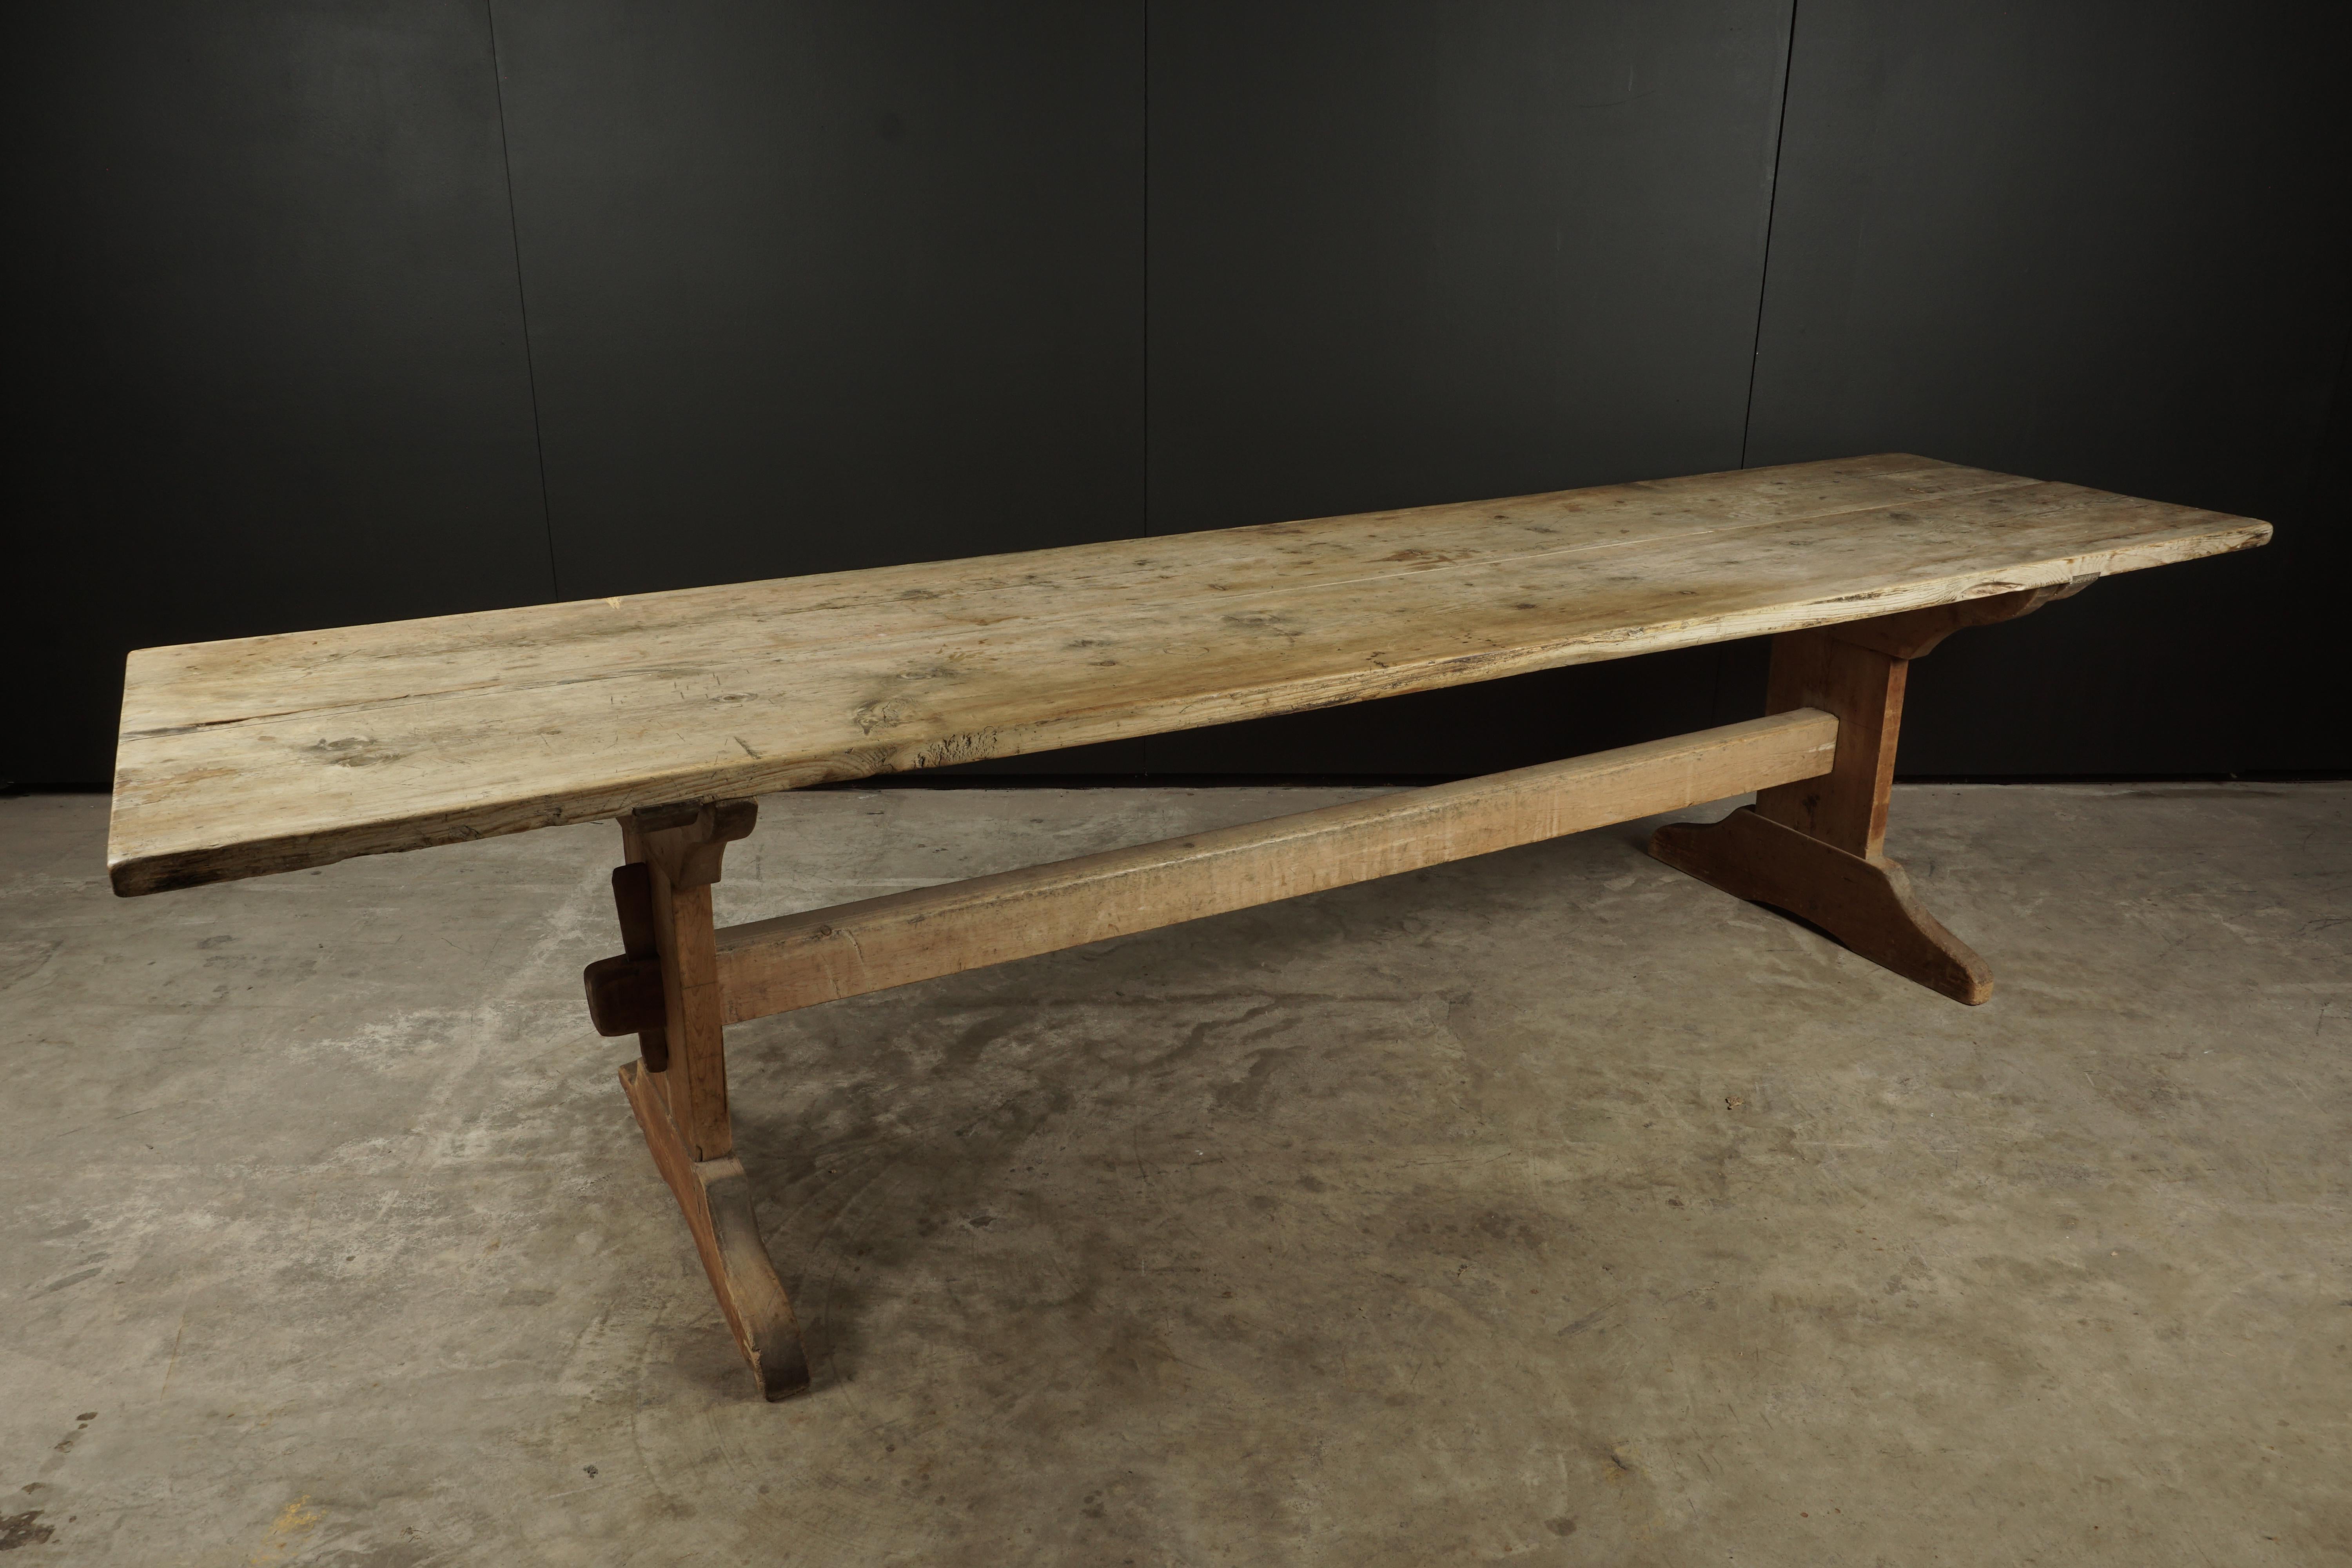 Rare large pine Bockbord table from Norway, circa 1800. Incredible wear and patina. Great condition.